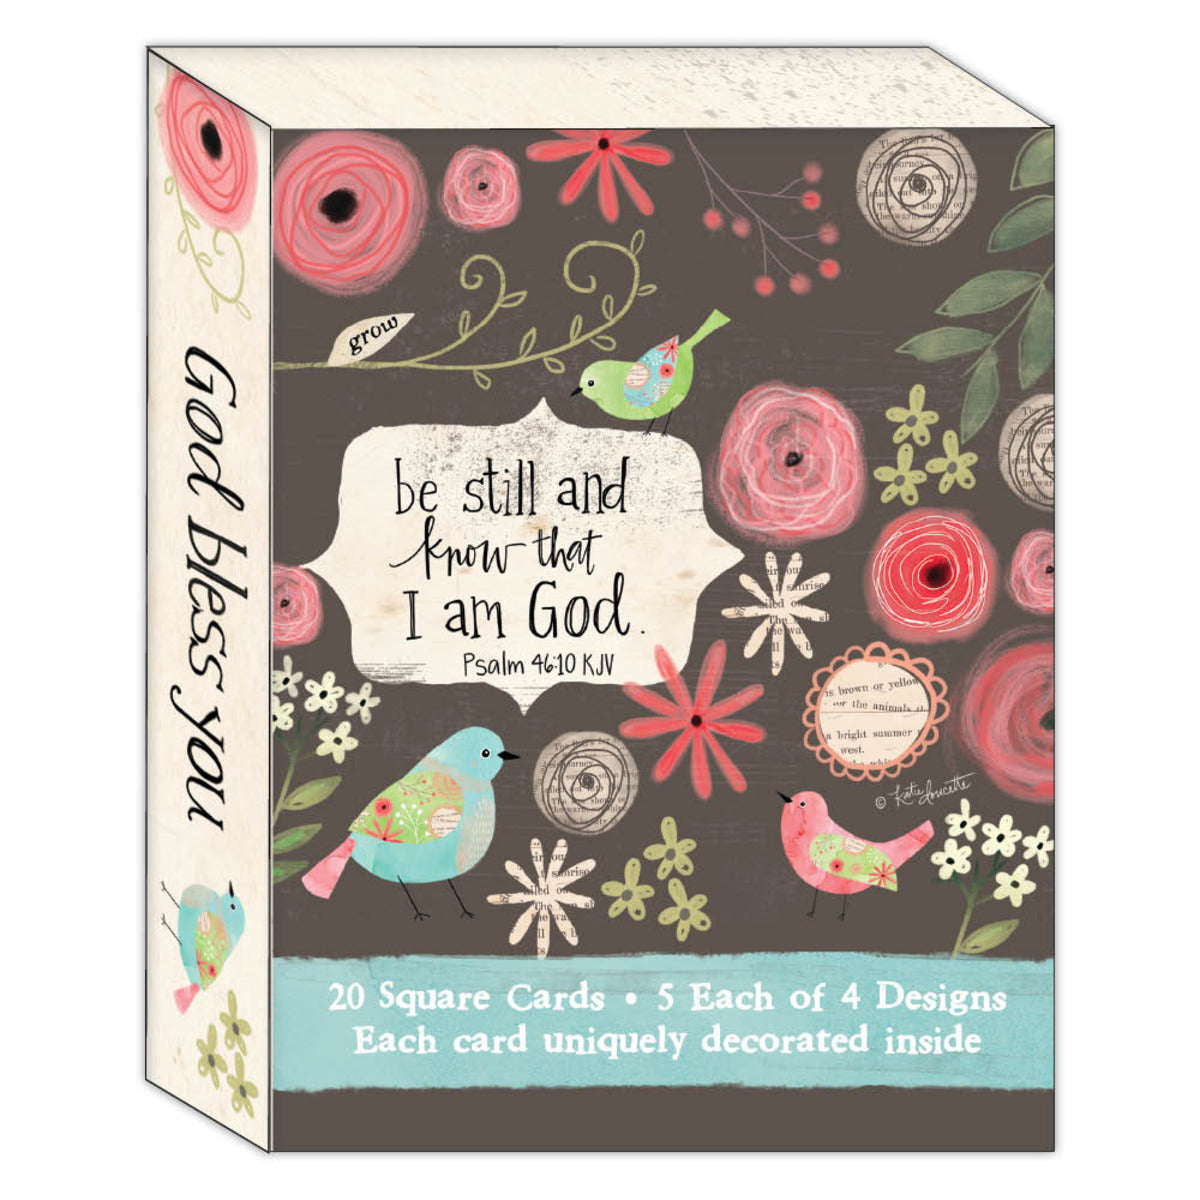 God Bless You - Boxed Note Card Assortment - 20 Cards & 20 Envelopes